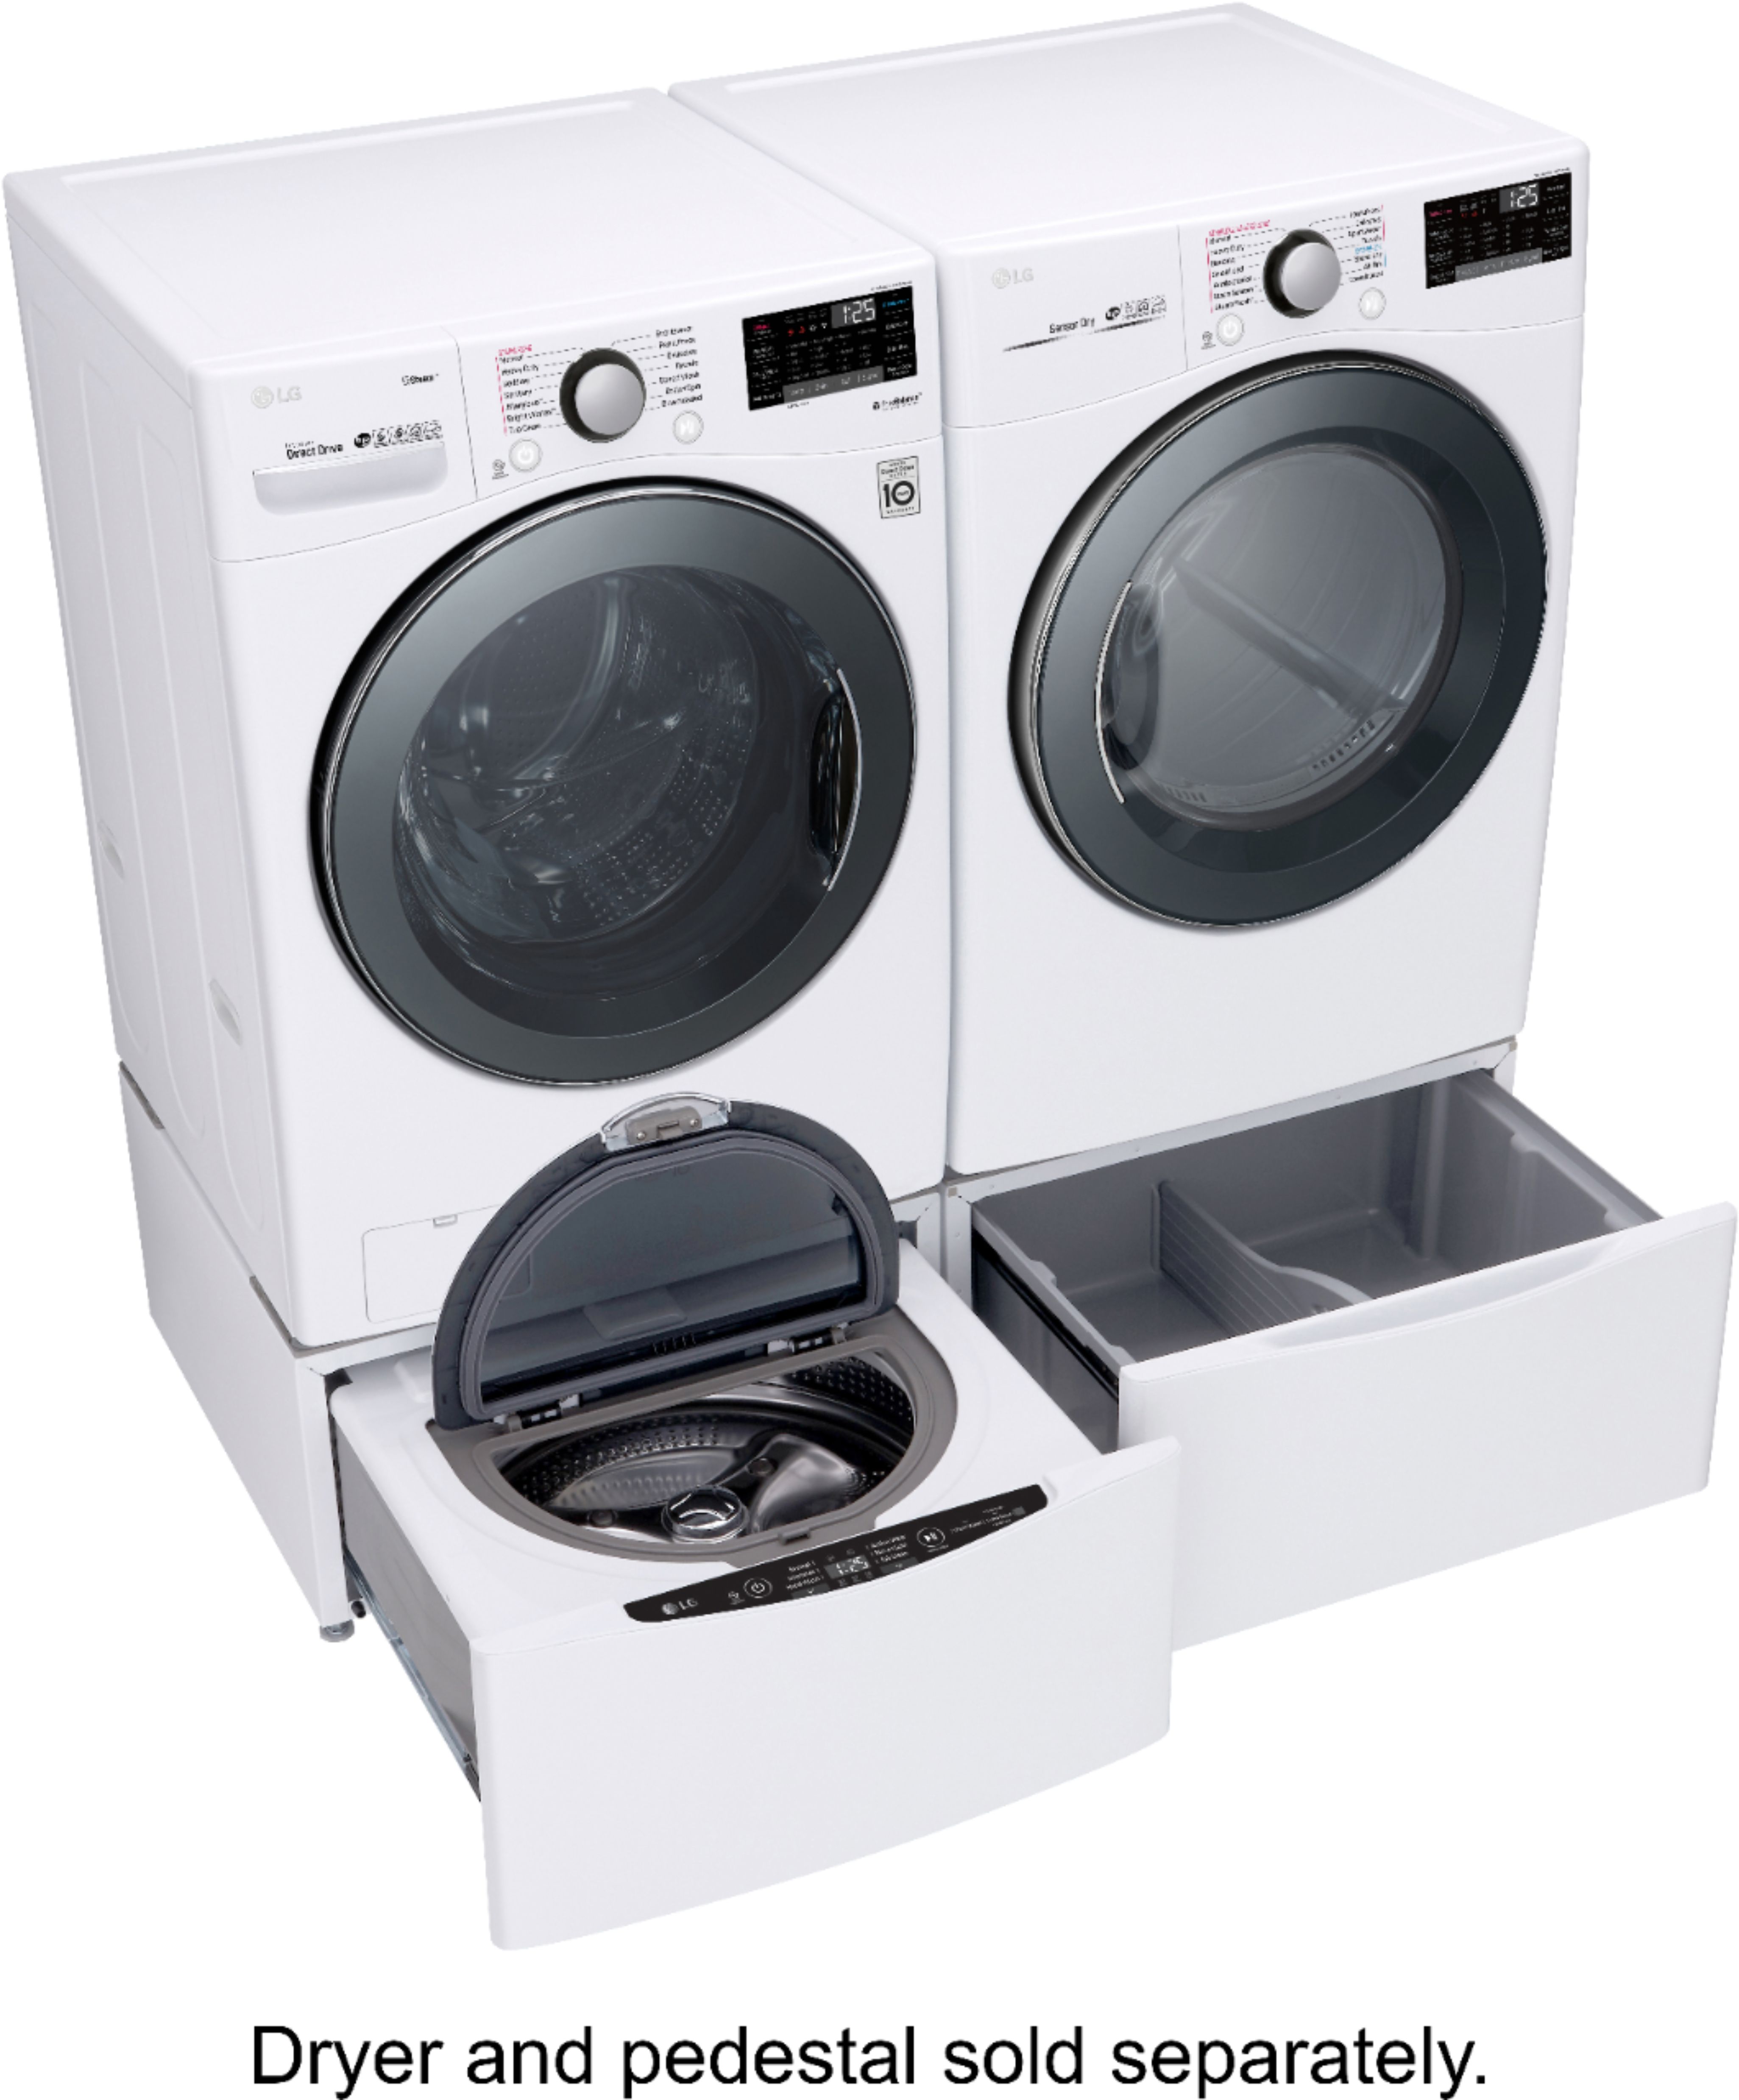 LG 4-cu ft High Efficiency Stackable Front-Load Washer (White